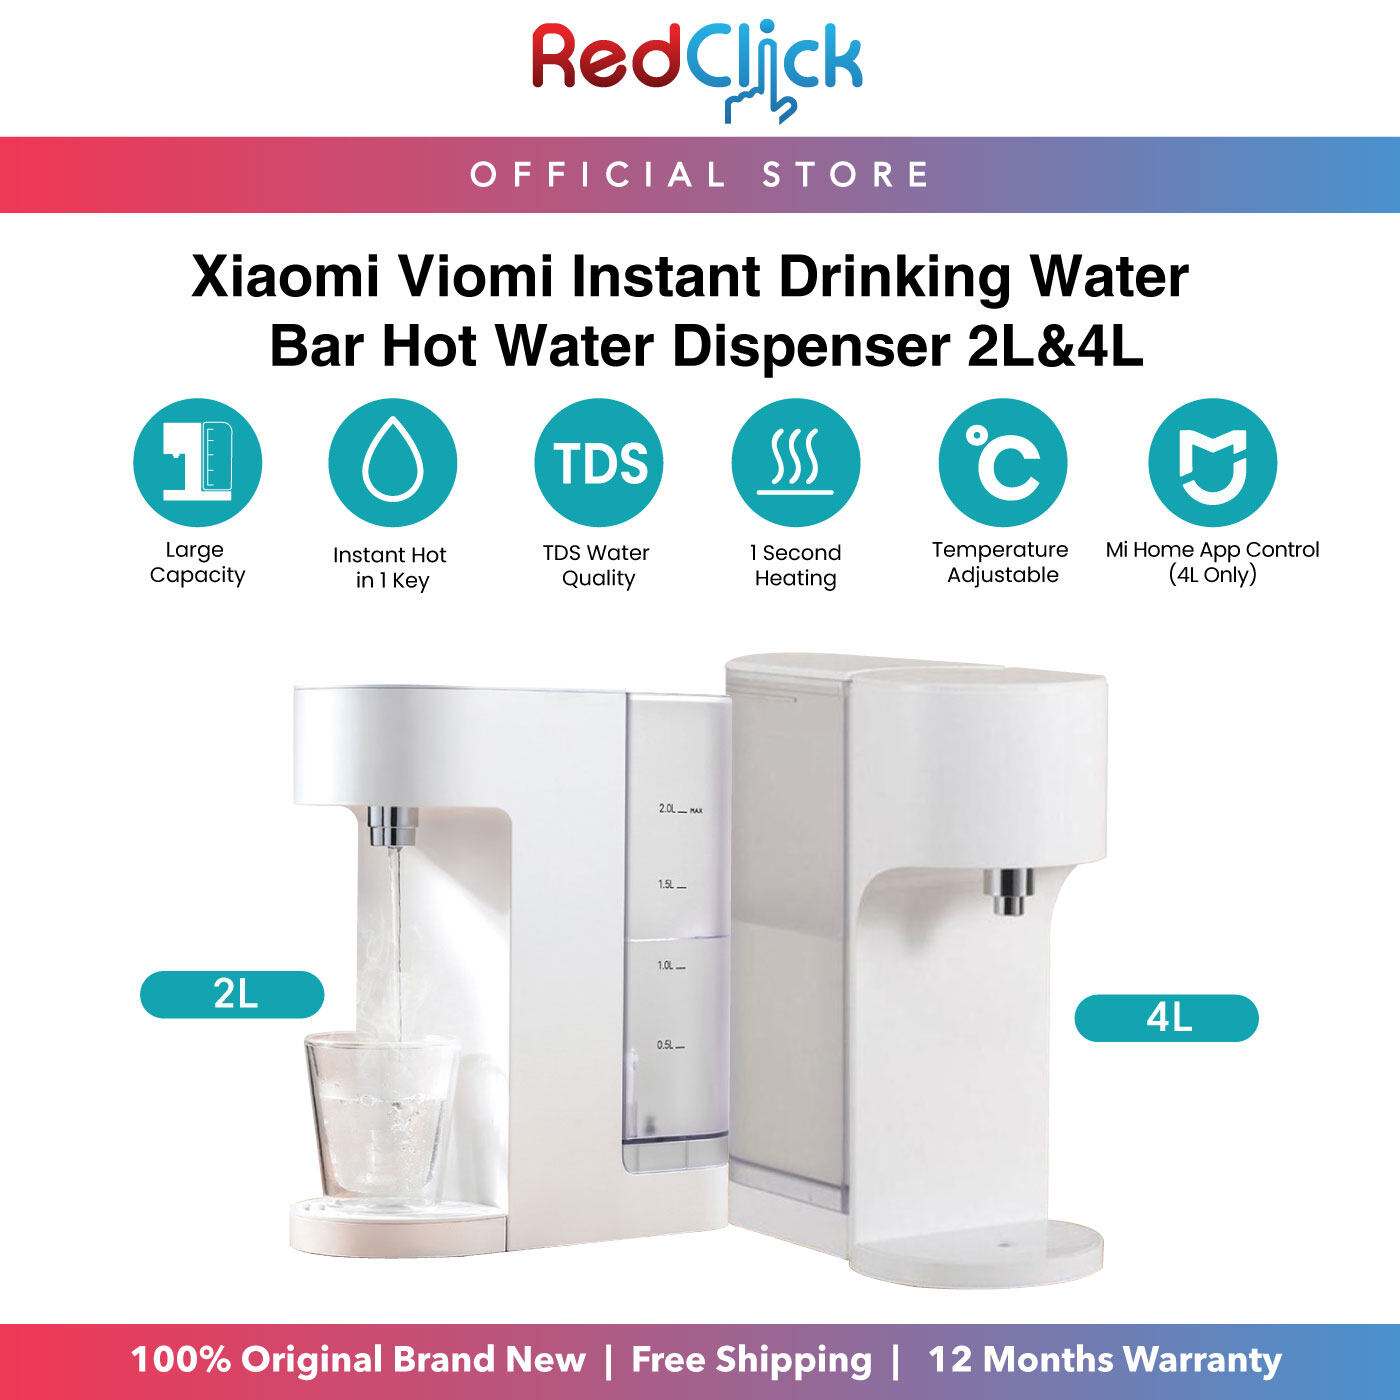 Xiaomi Viomi Instant Drinking Water 2L / 4L Bar Hot Water Dispenser Adjustable Temperature Baby Milk Partner Apps Support (Only For 4L)